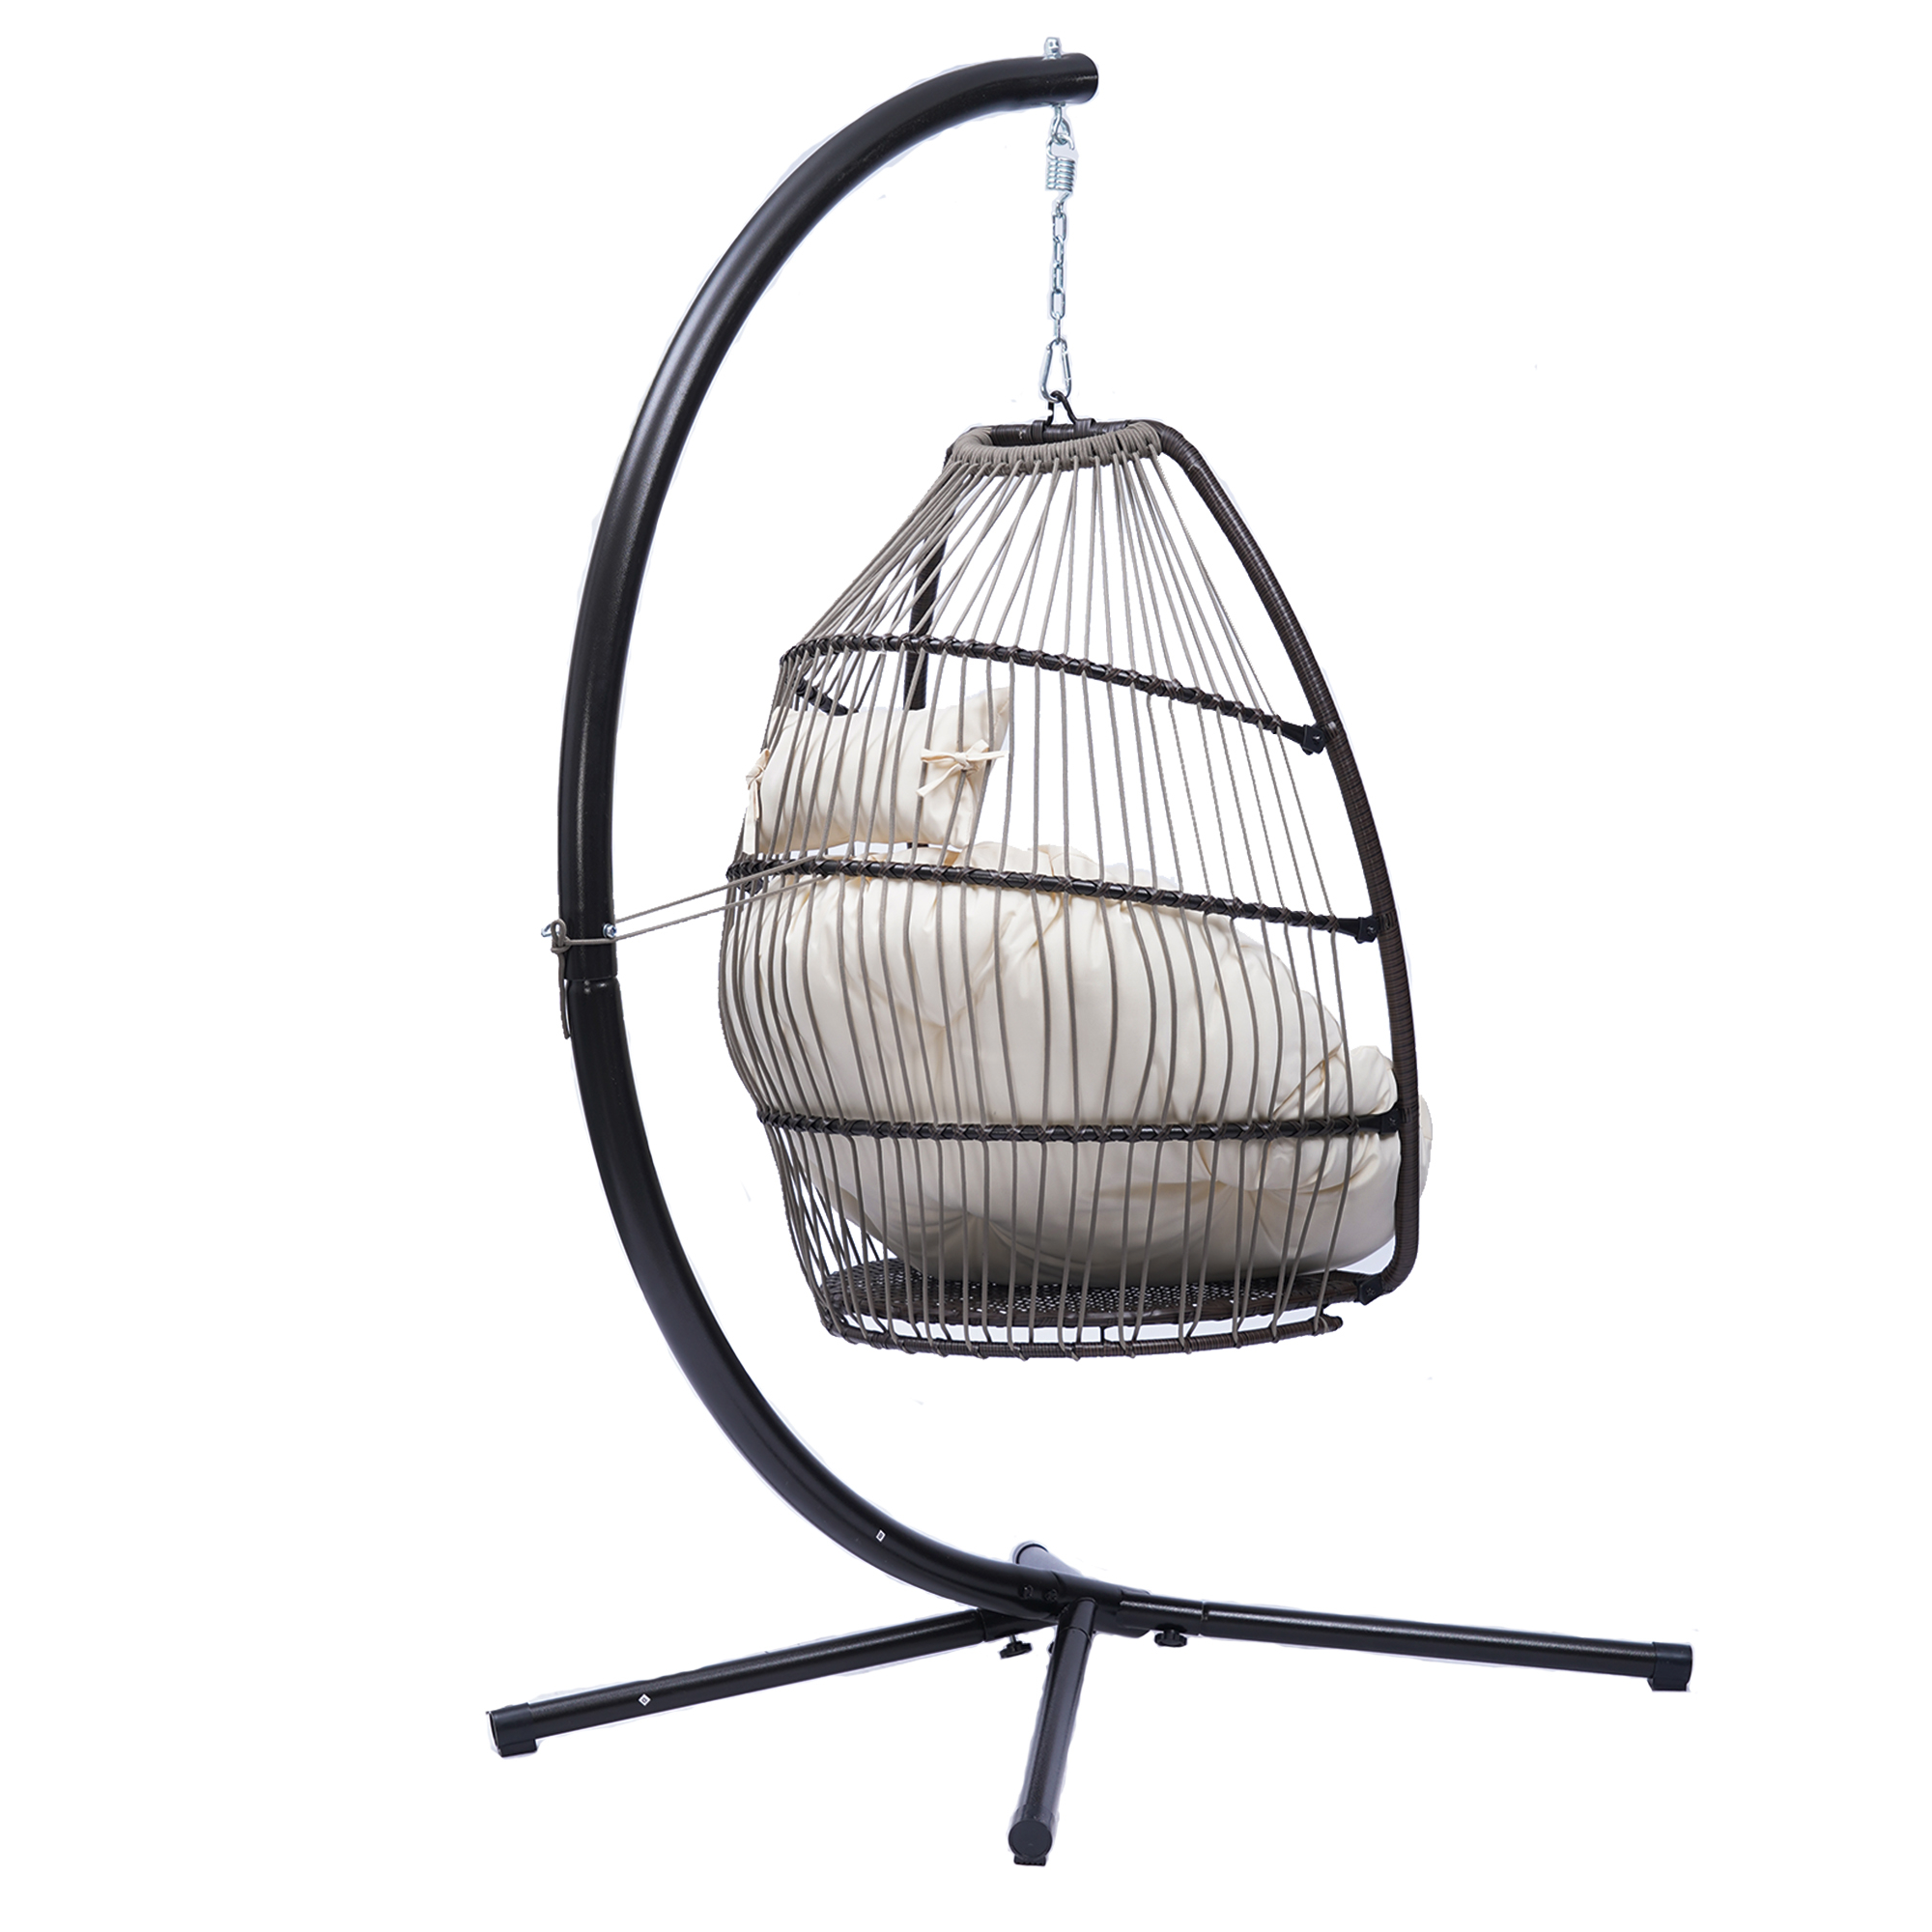 Outdoor Yard Folding Hanging Chair Egg Chair with Stand Indoor Outdoor Balcony Bedroom Basket Hanging Lounge Chair - image 5 of 9